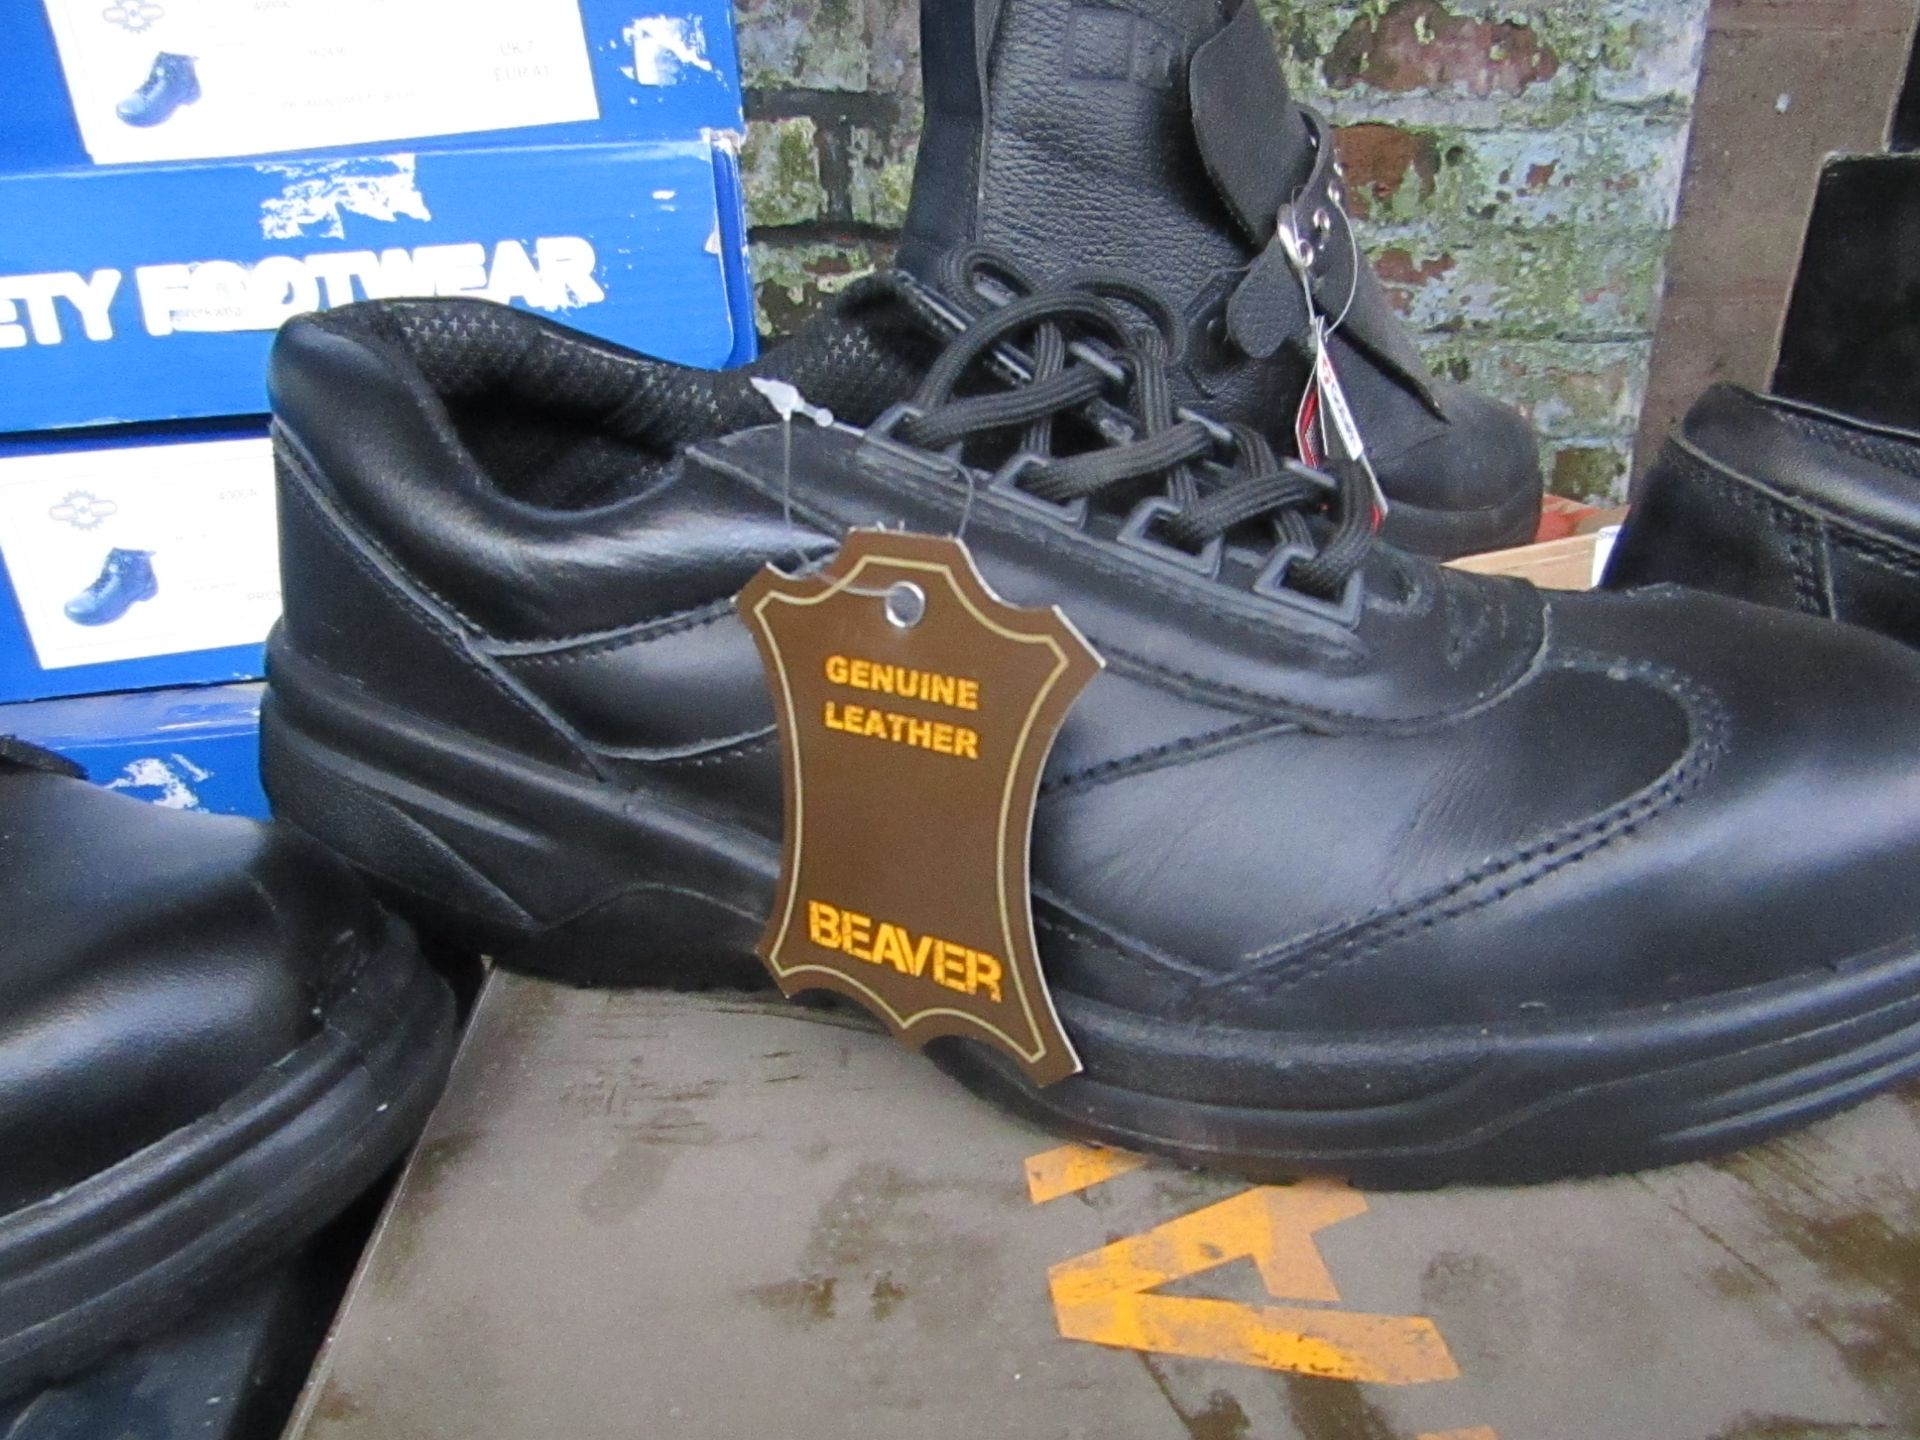 Beaver Safety shoes, new size 7